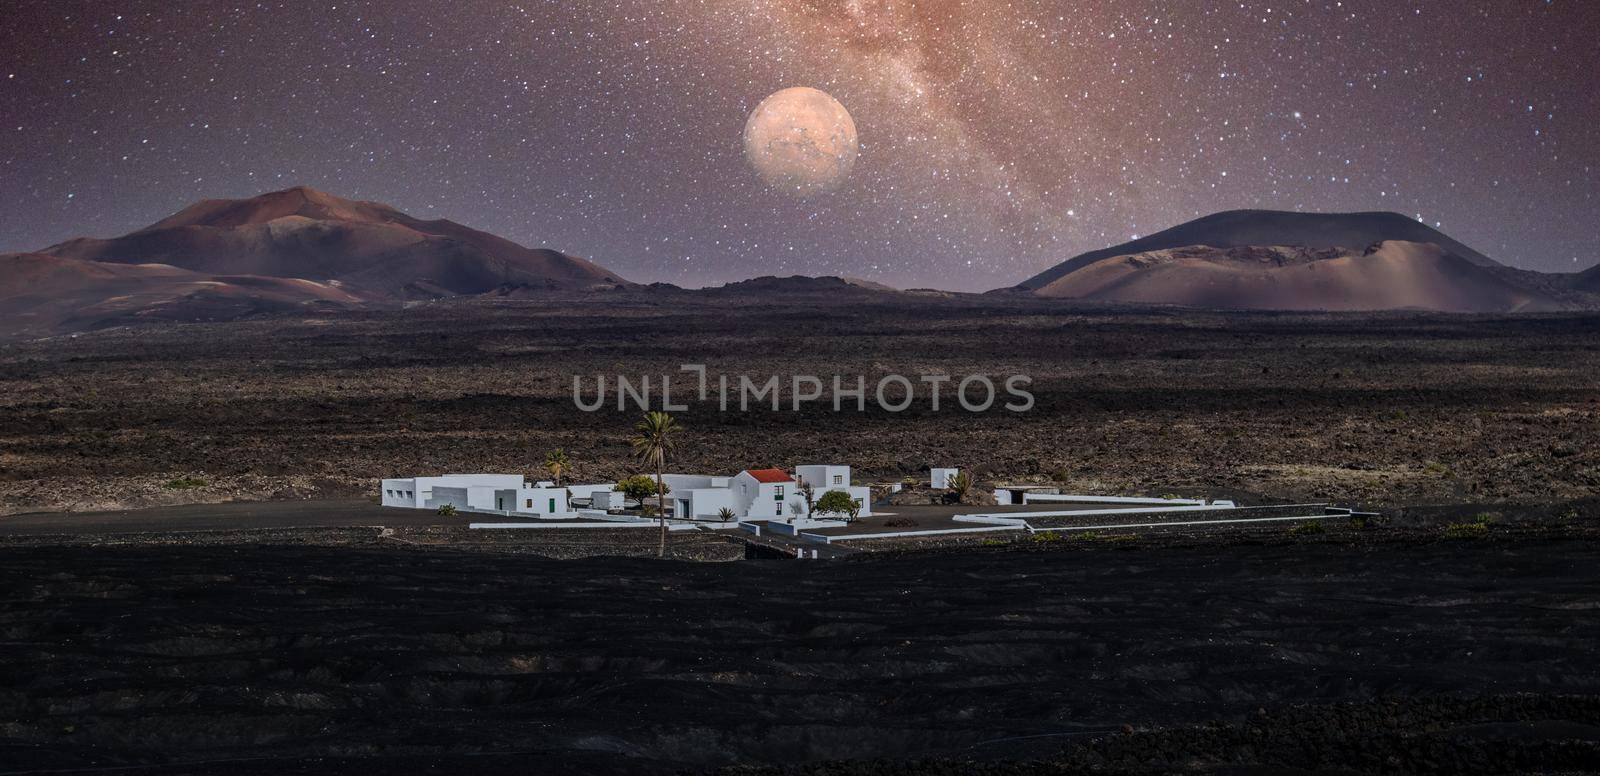 Amazing nocturnal panoramic landscape of volcano craters in Timanfaya national park. Full moon over La Gueria, Lanzarote island, Canary islans, Spain. Artistic night sky picture by kasto